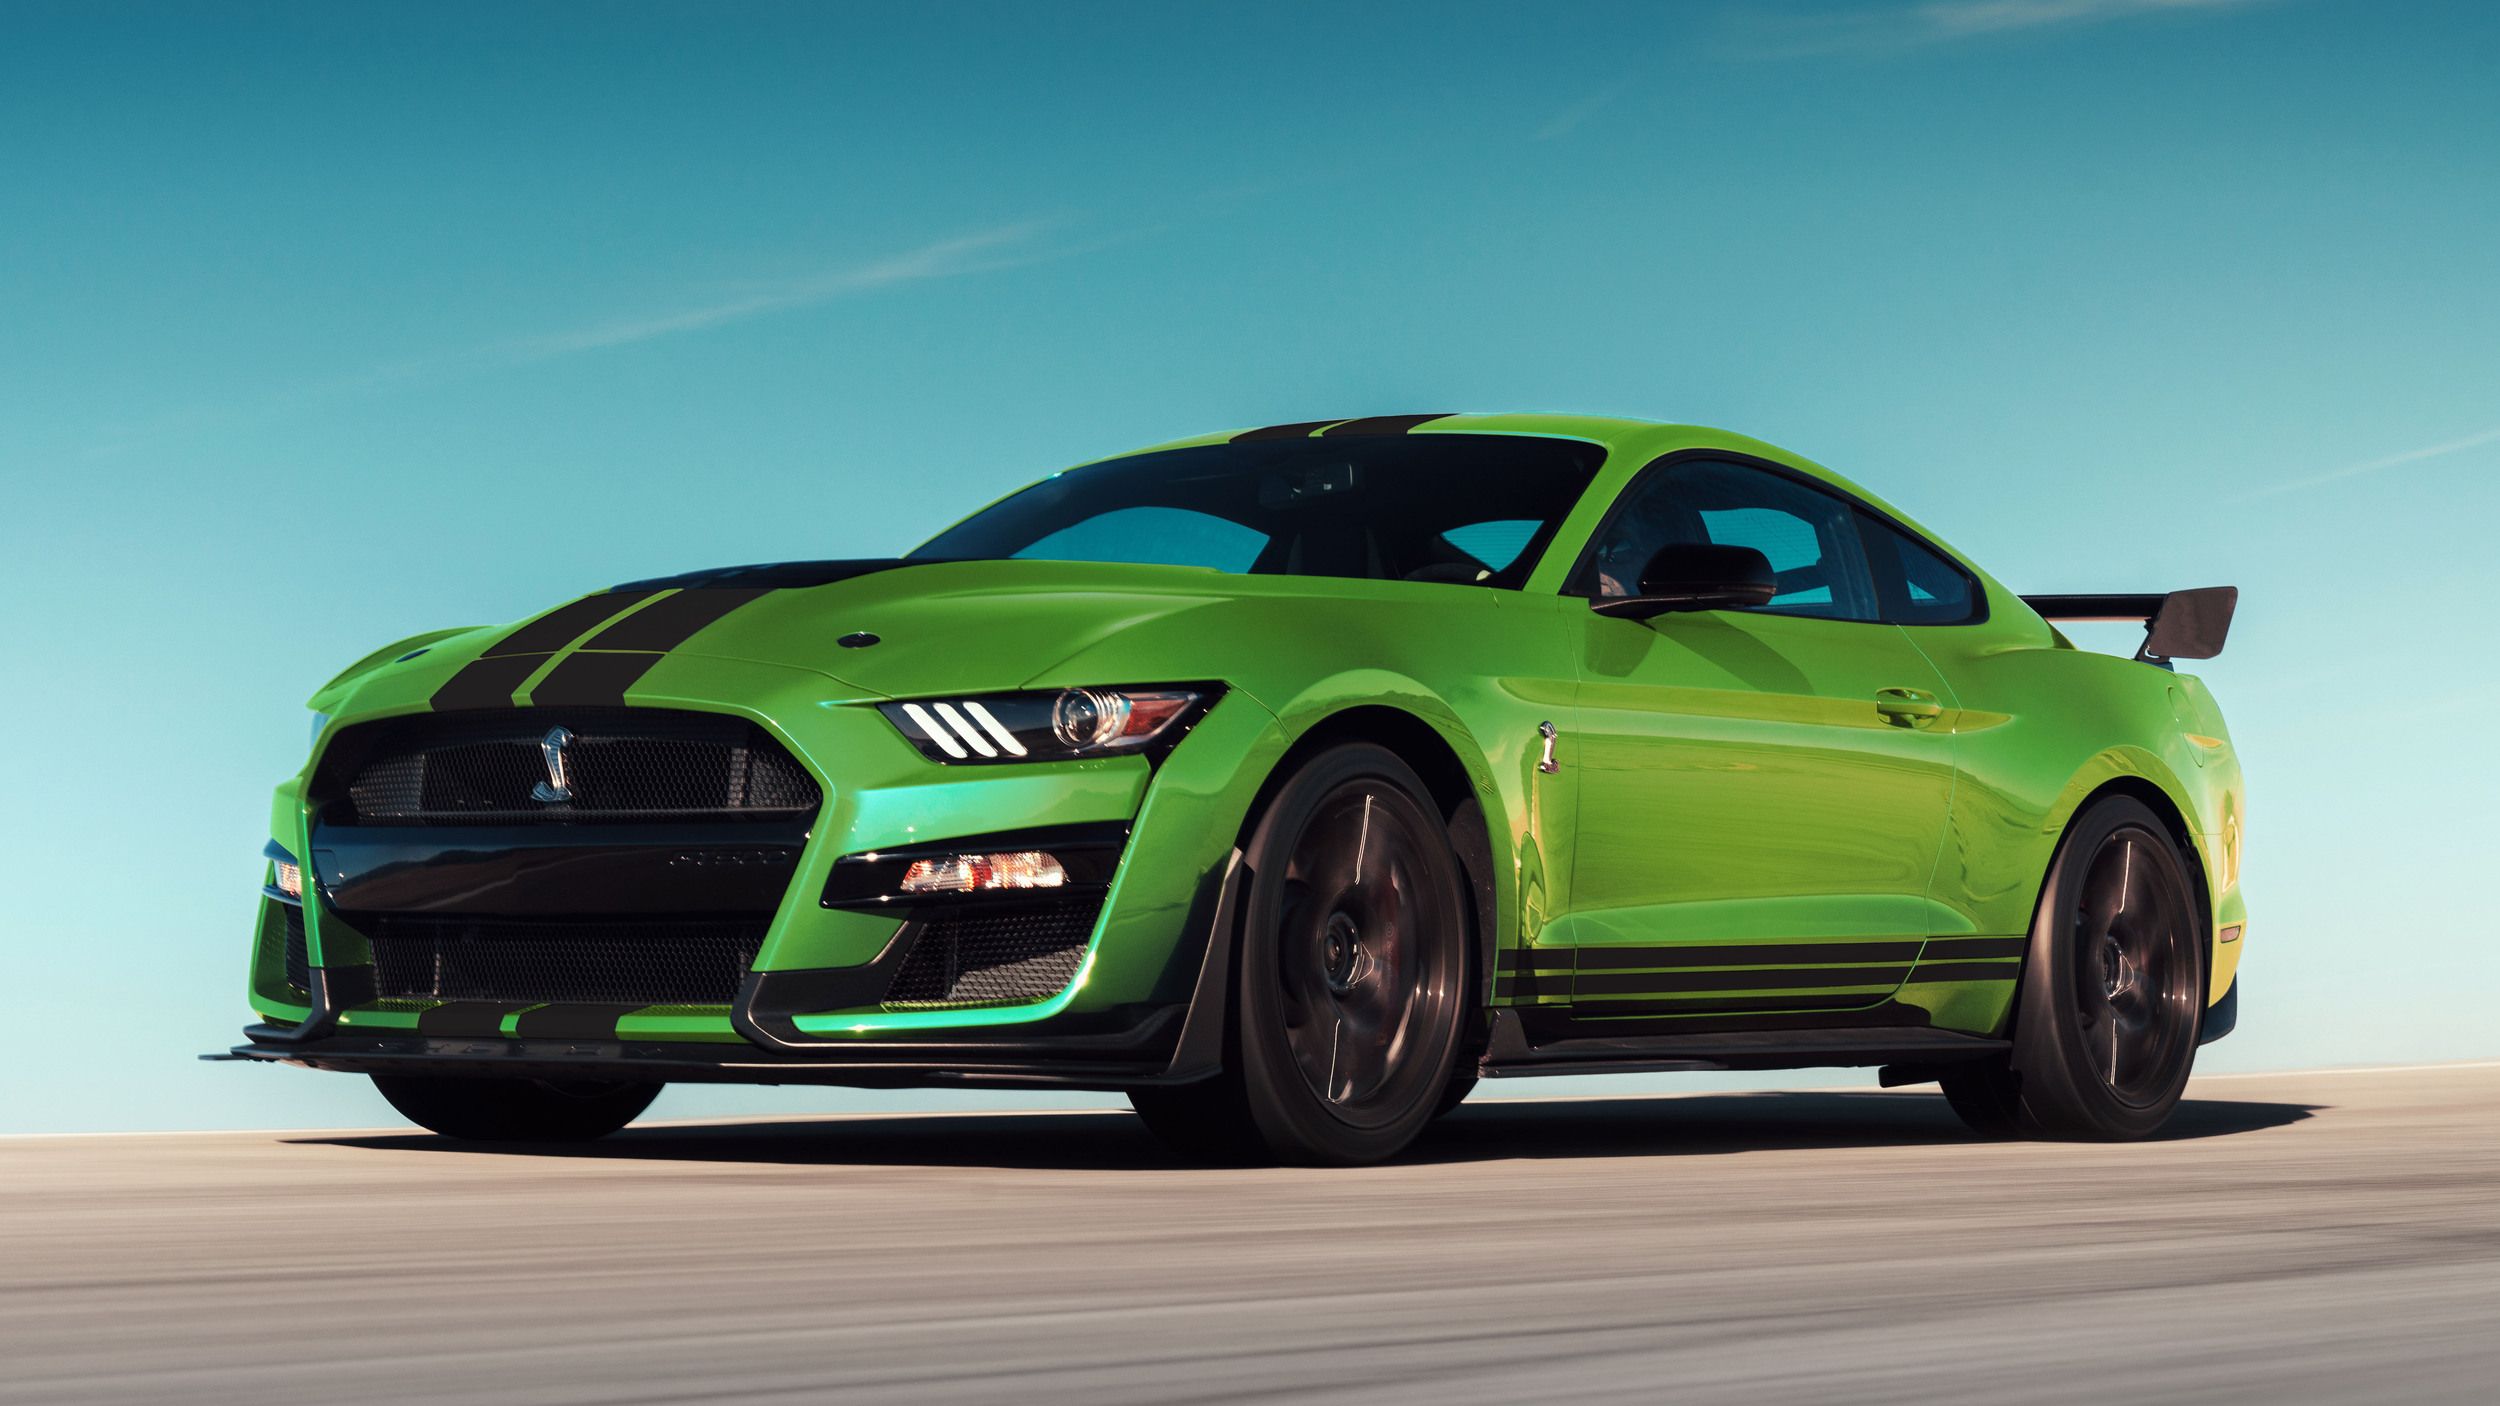 Ford Mustang GT500 Grabber Lime Photo Gallery